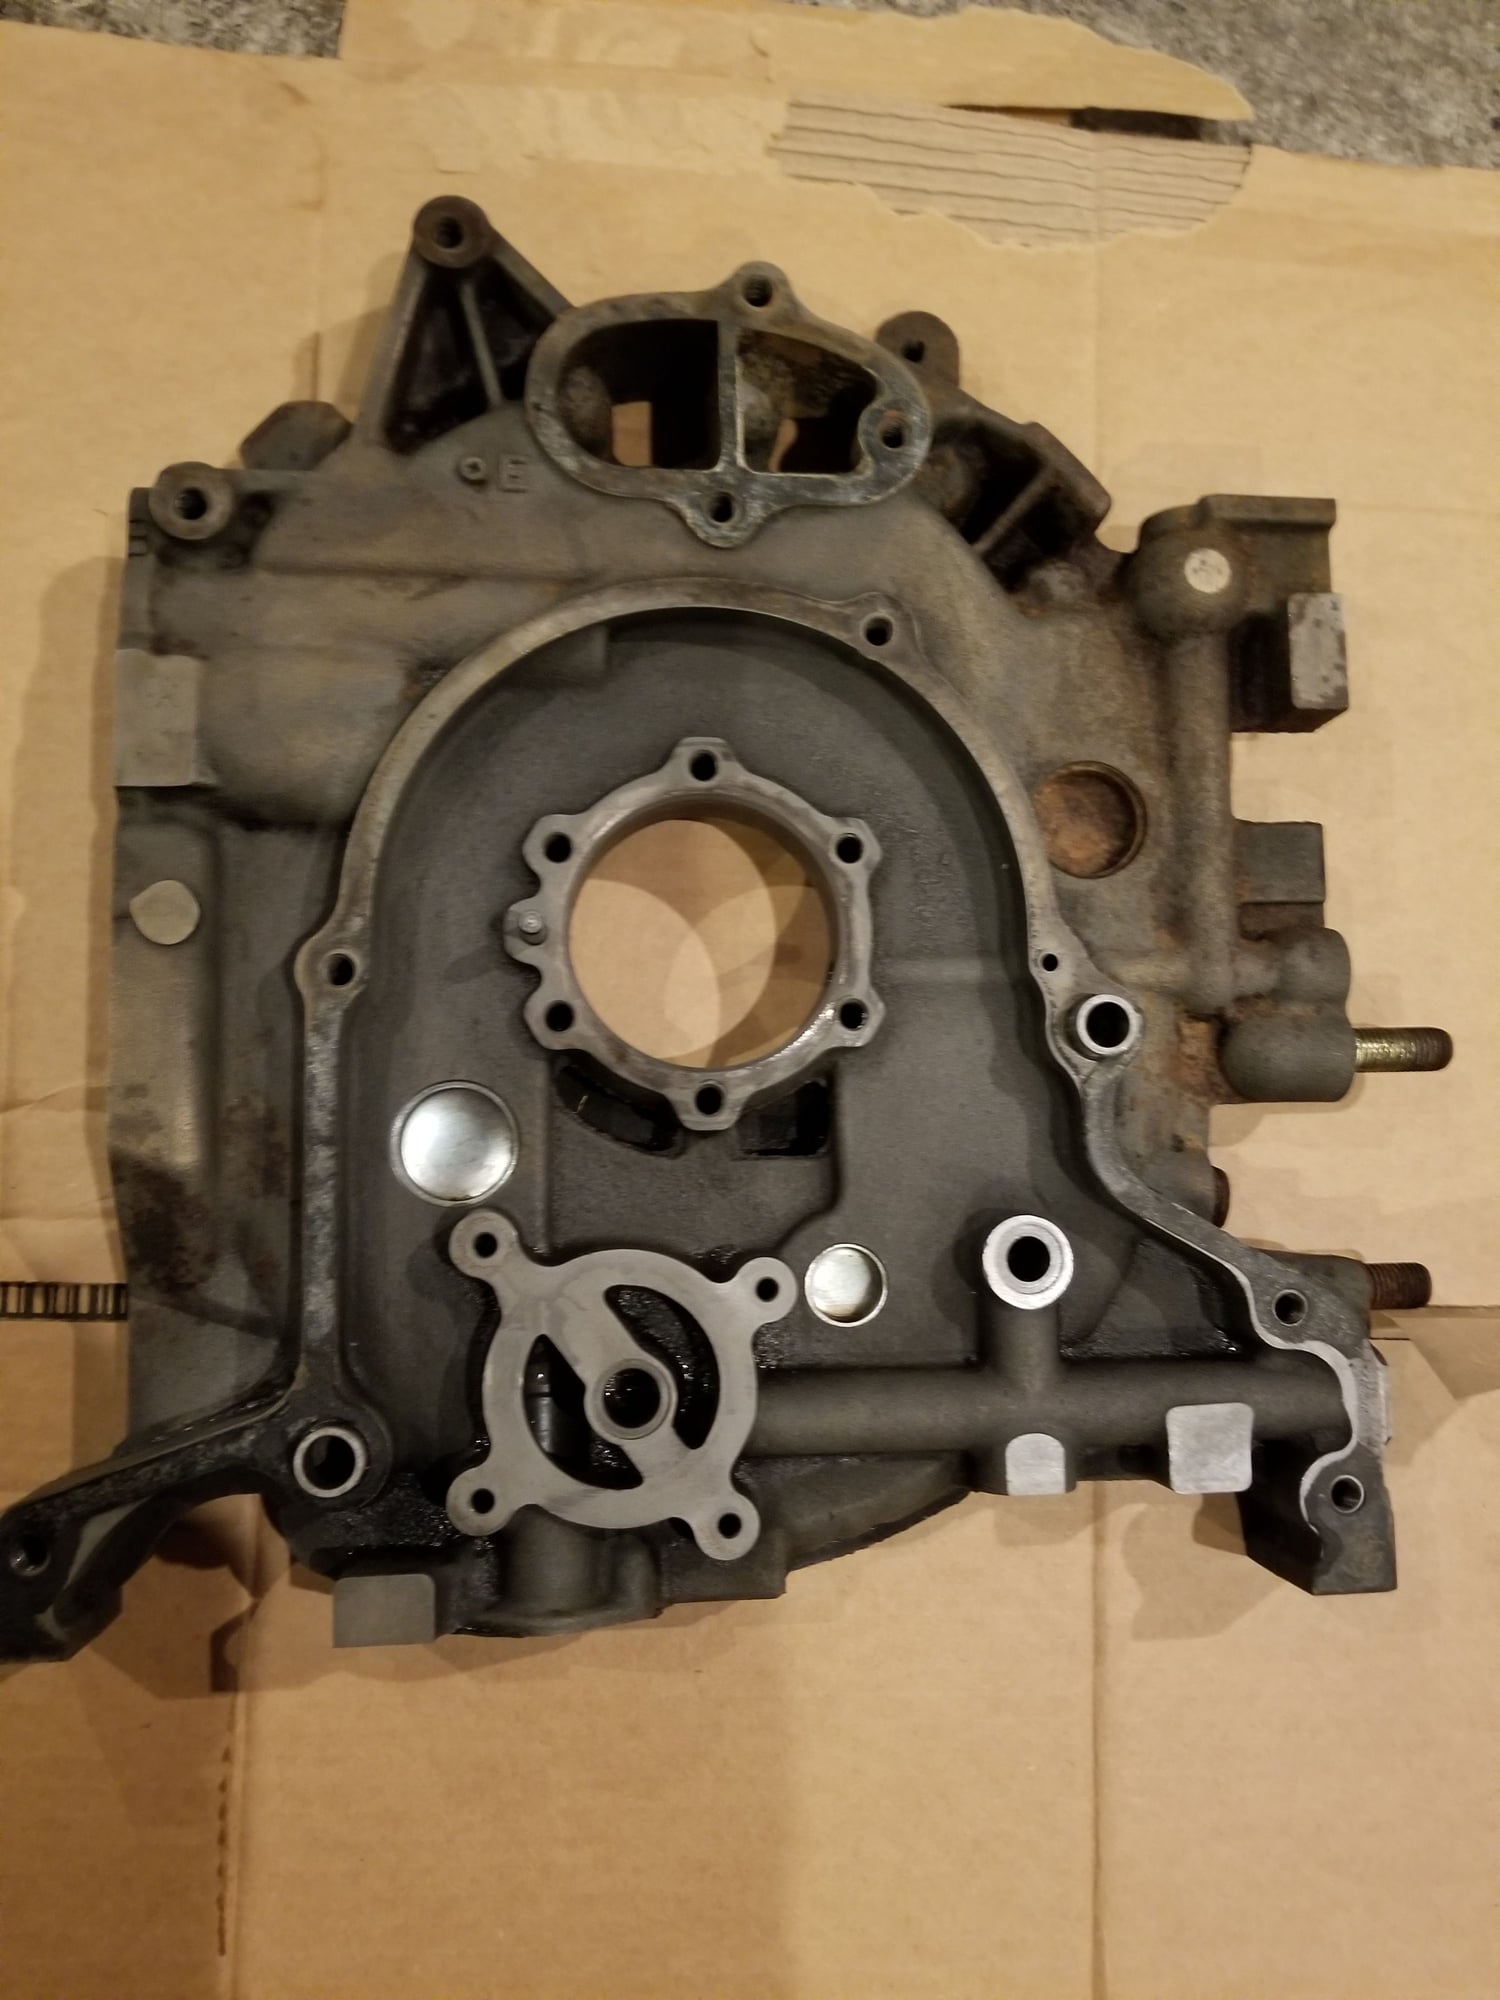 1988 Mazda RX-7 - 1988 FC/S4 NA engine parts and transmission part out - Accessories - $1 - Coopersburg, PA 18036, United States